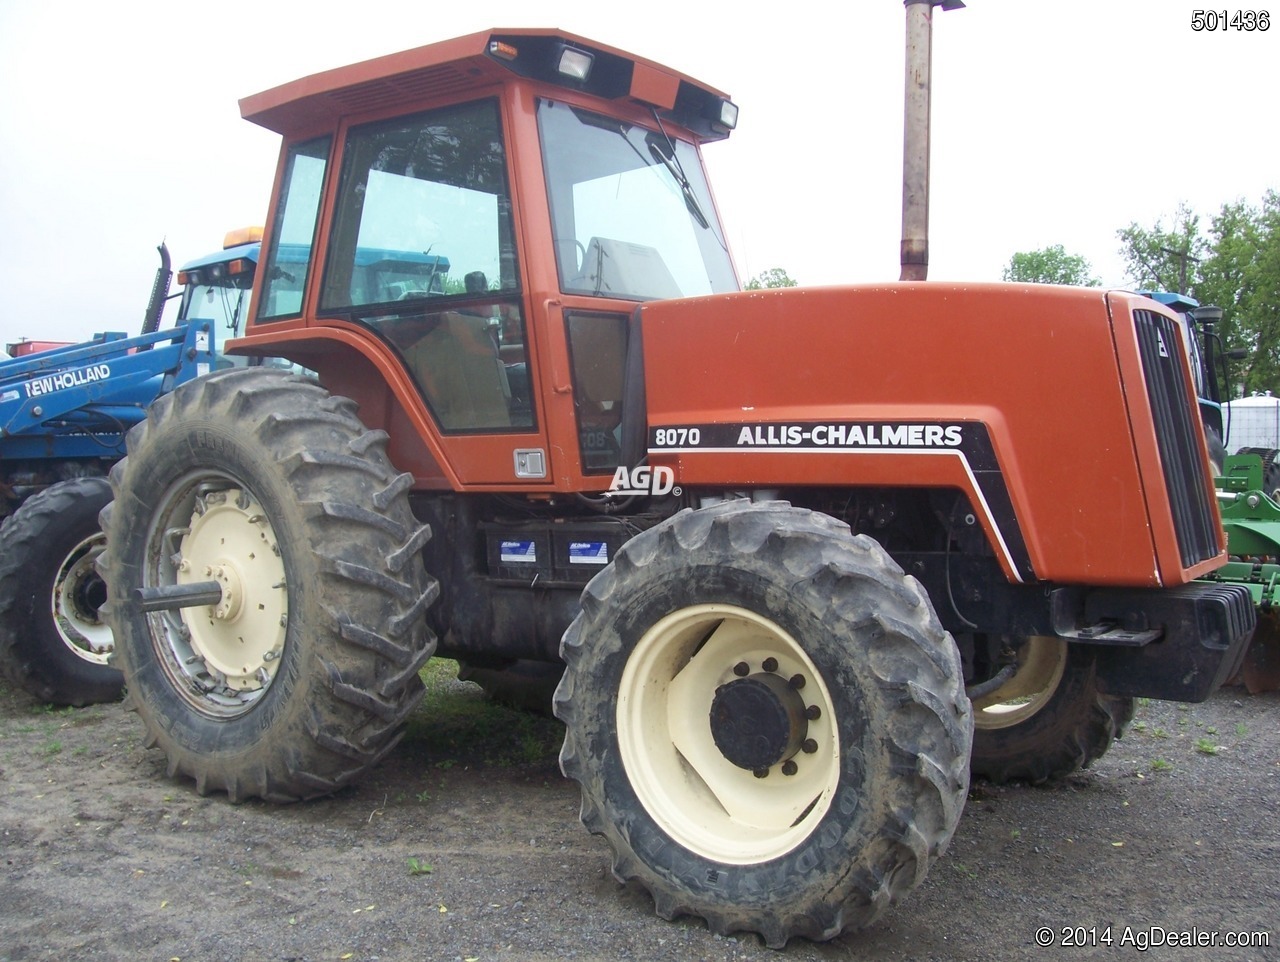 1984 Allis Chalmers 8070 Tractor